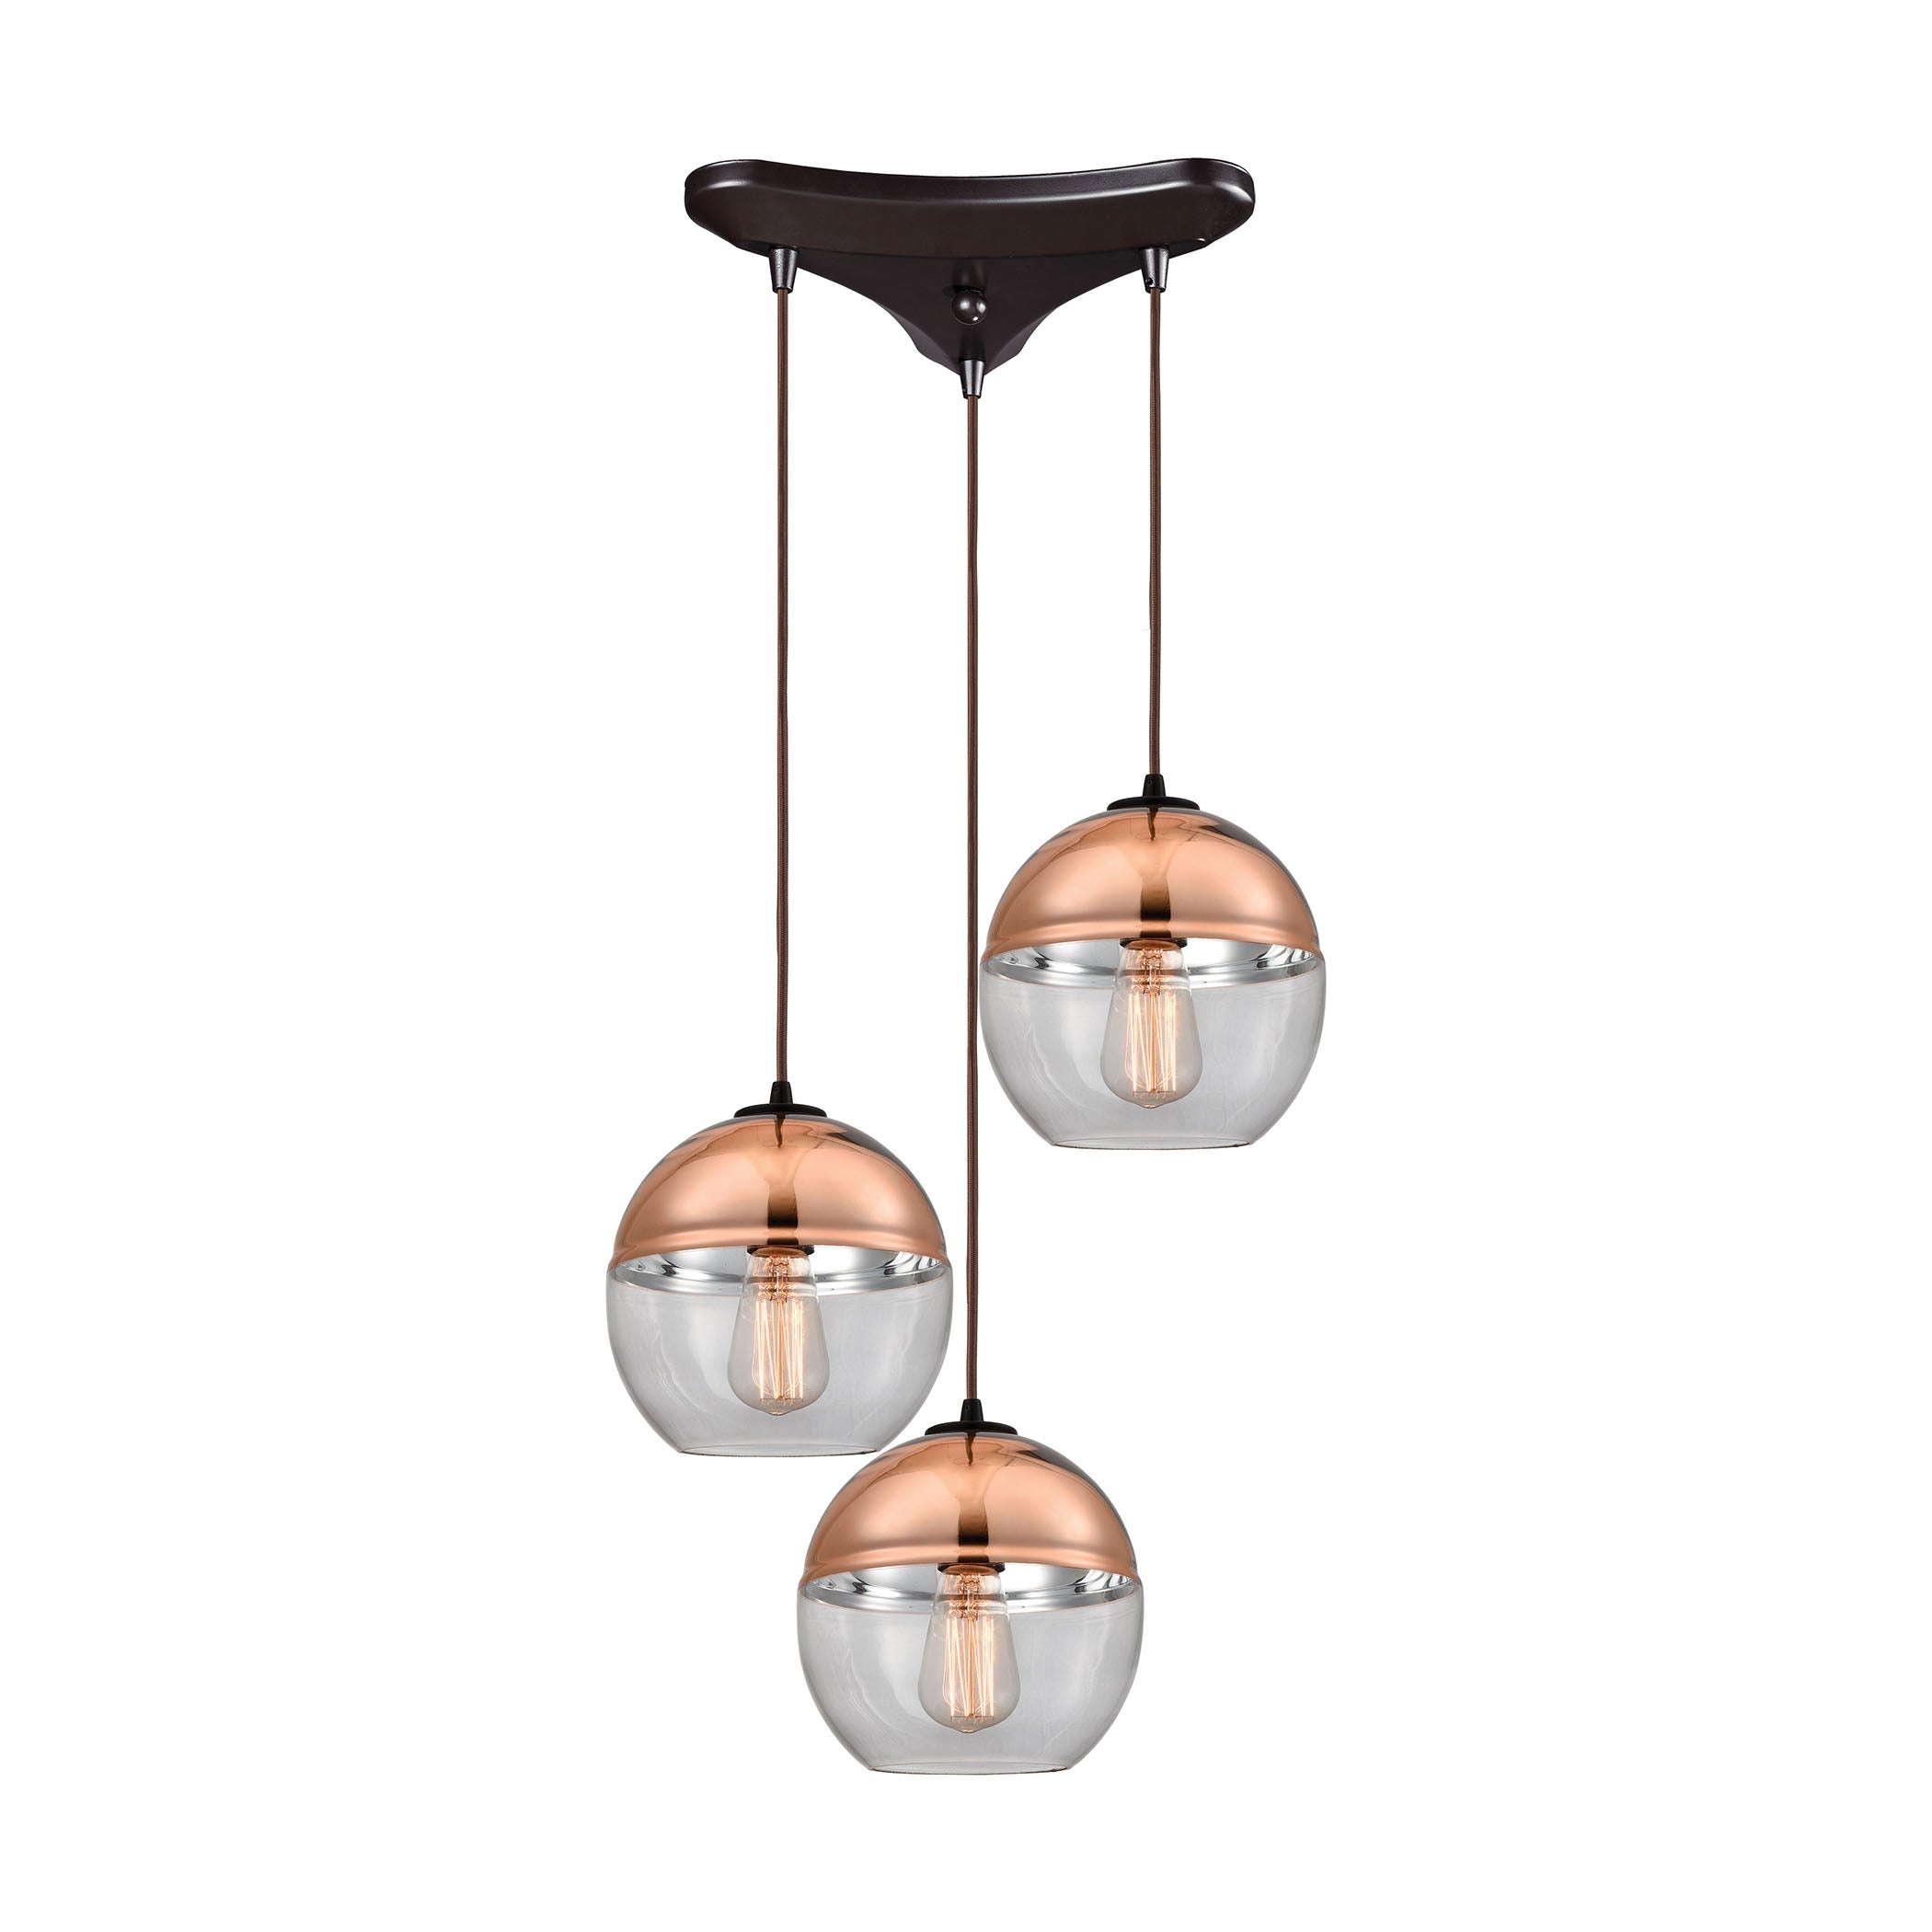 ELK Lighting 10490/3 Revelo 3-Light Triangular Pendant Fixture in Oil Rubbed Bronze with Clear and Copper-plated Glass